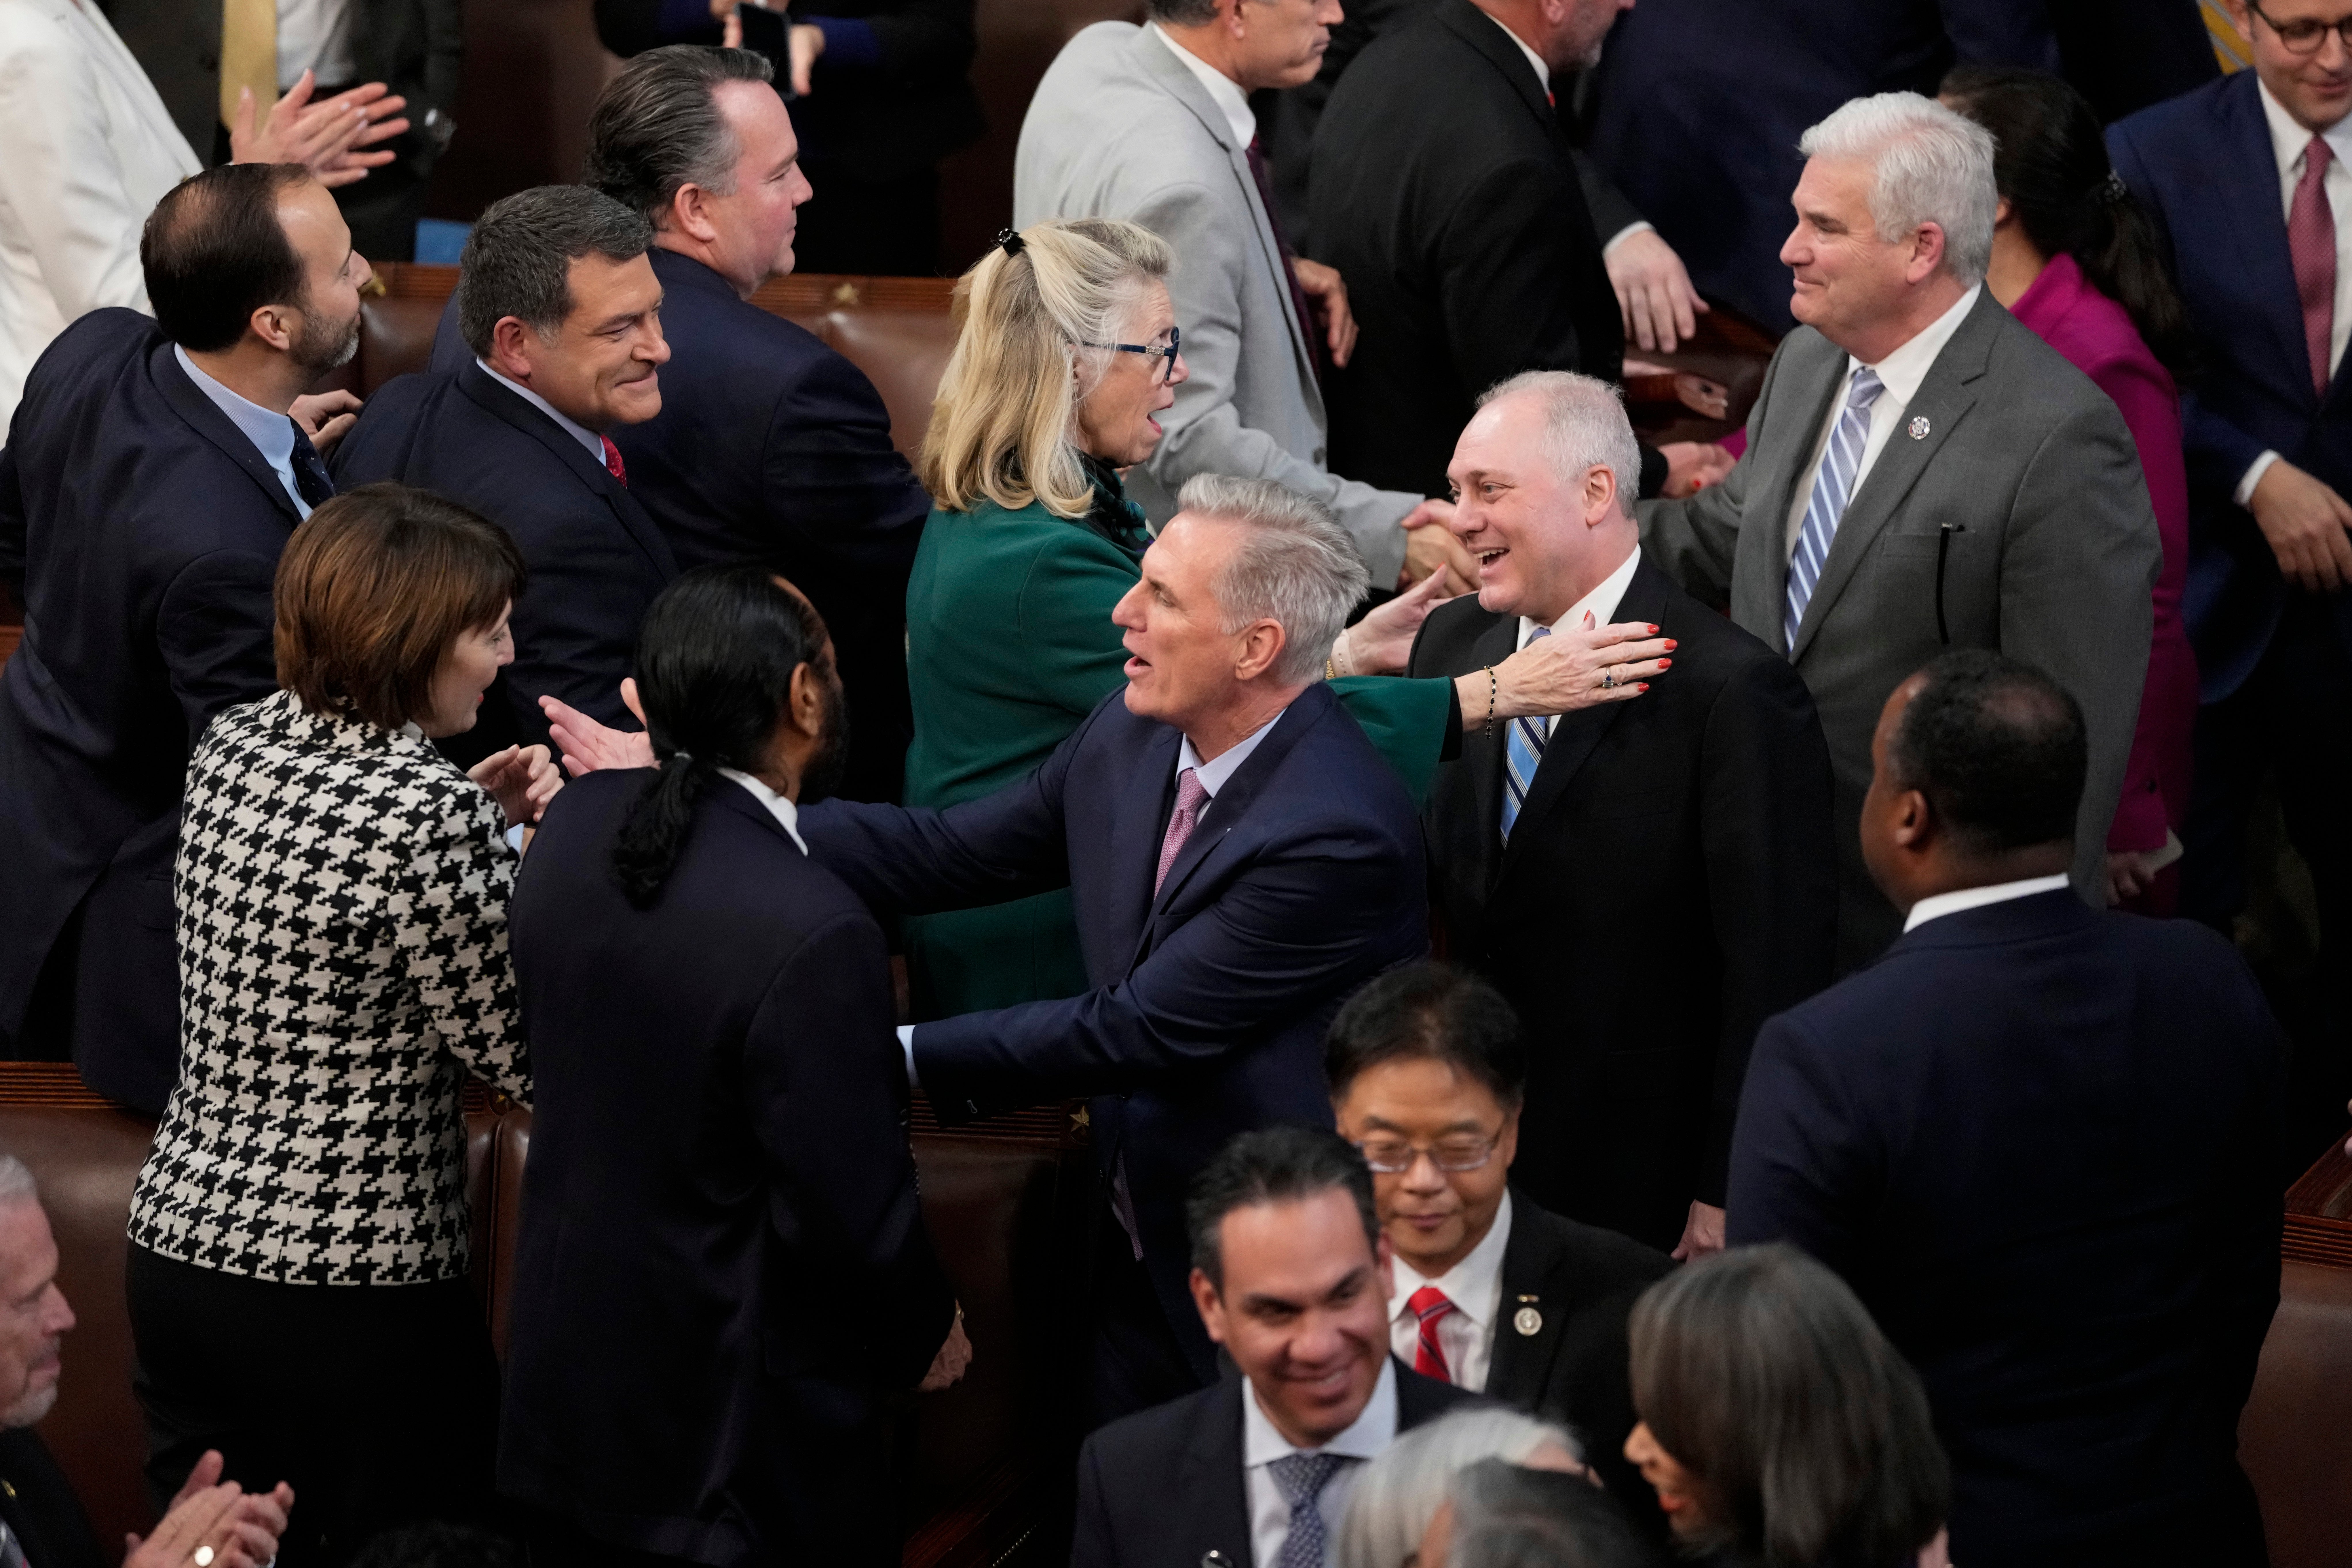 Representative Kevin McCarthy arrives to be sworn in as speaker of the House after winning the 15th vote in the House chamber, in Washington, early Saturday, 7 January 2023